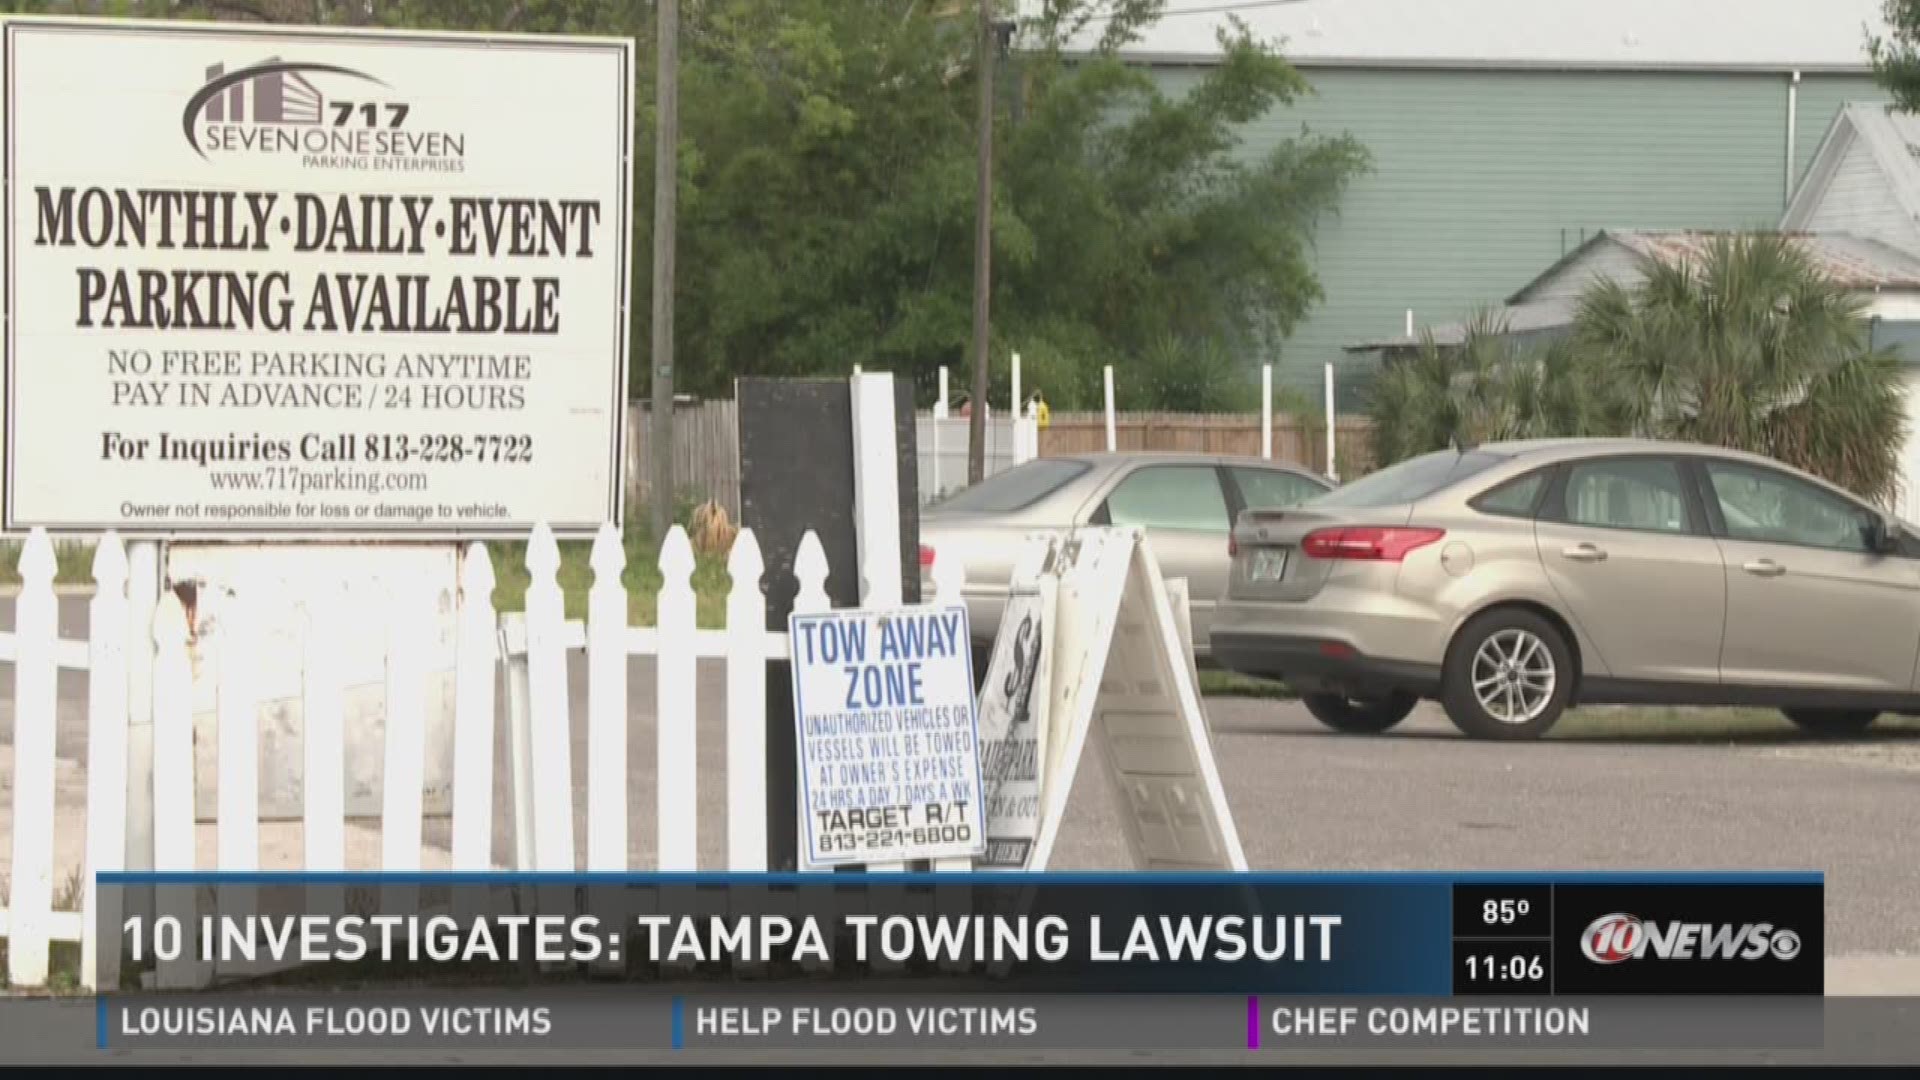 A lawsuit has been filed against a towing company and parking company over their practices.